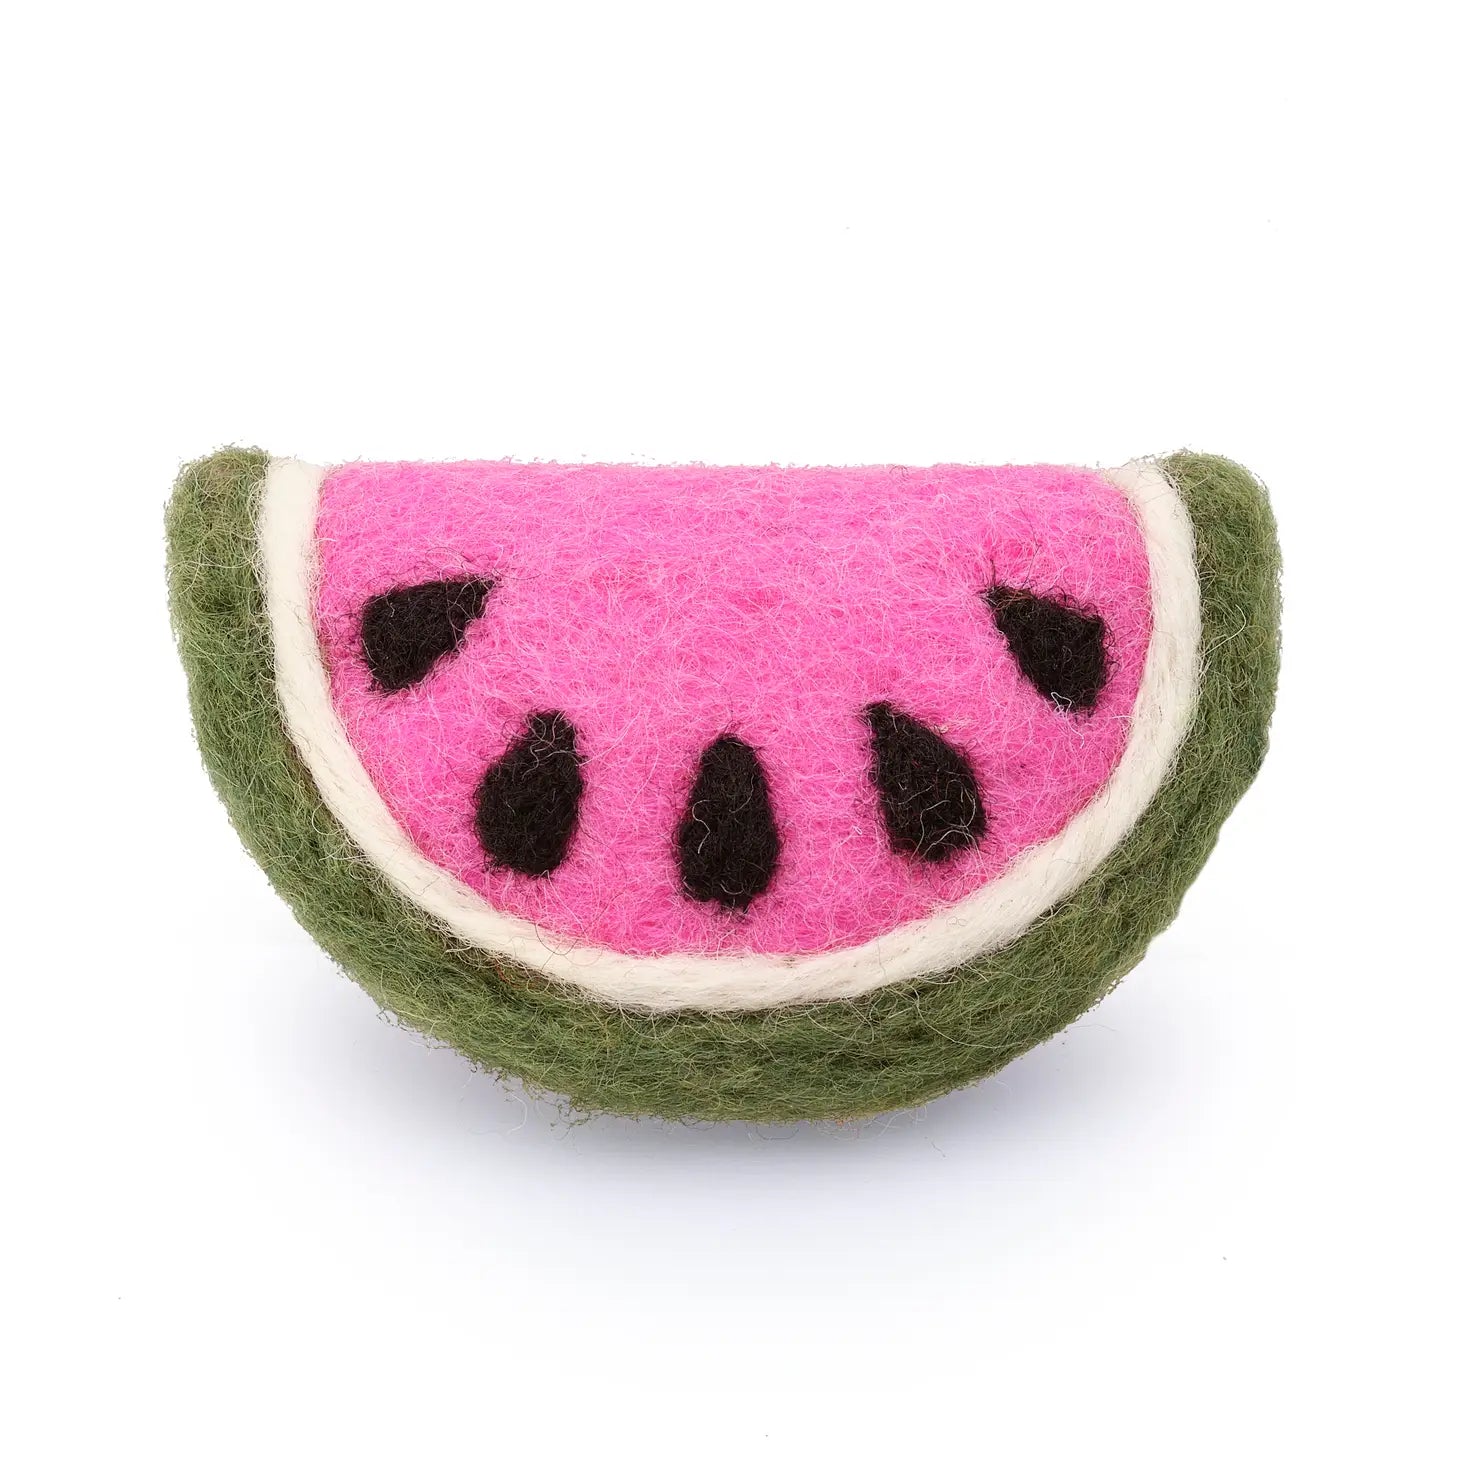 Watermelon cat toy on white background.